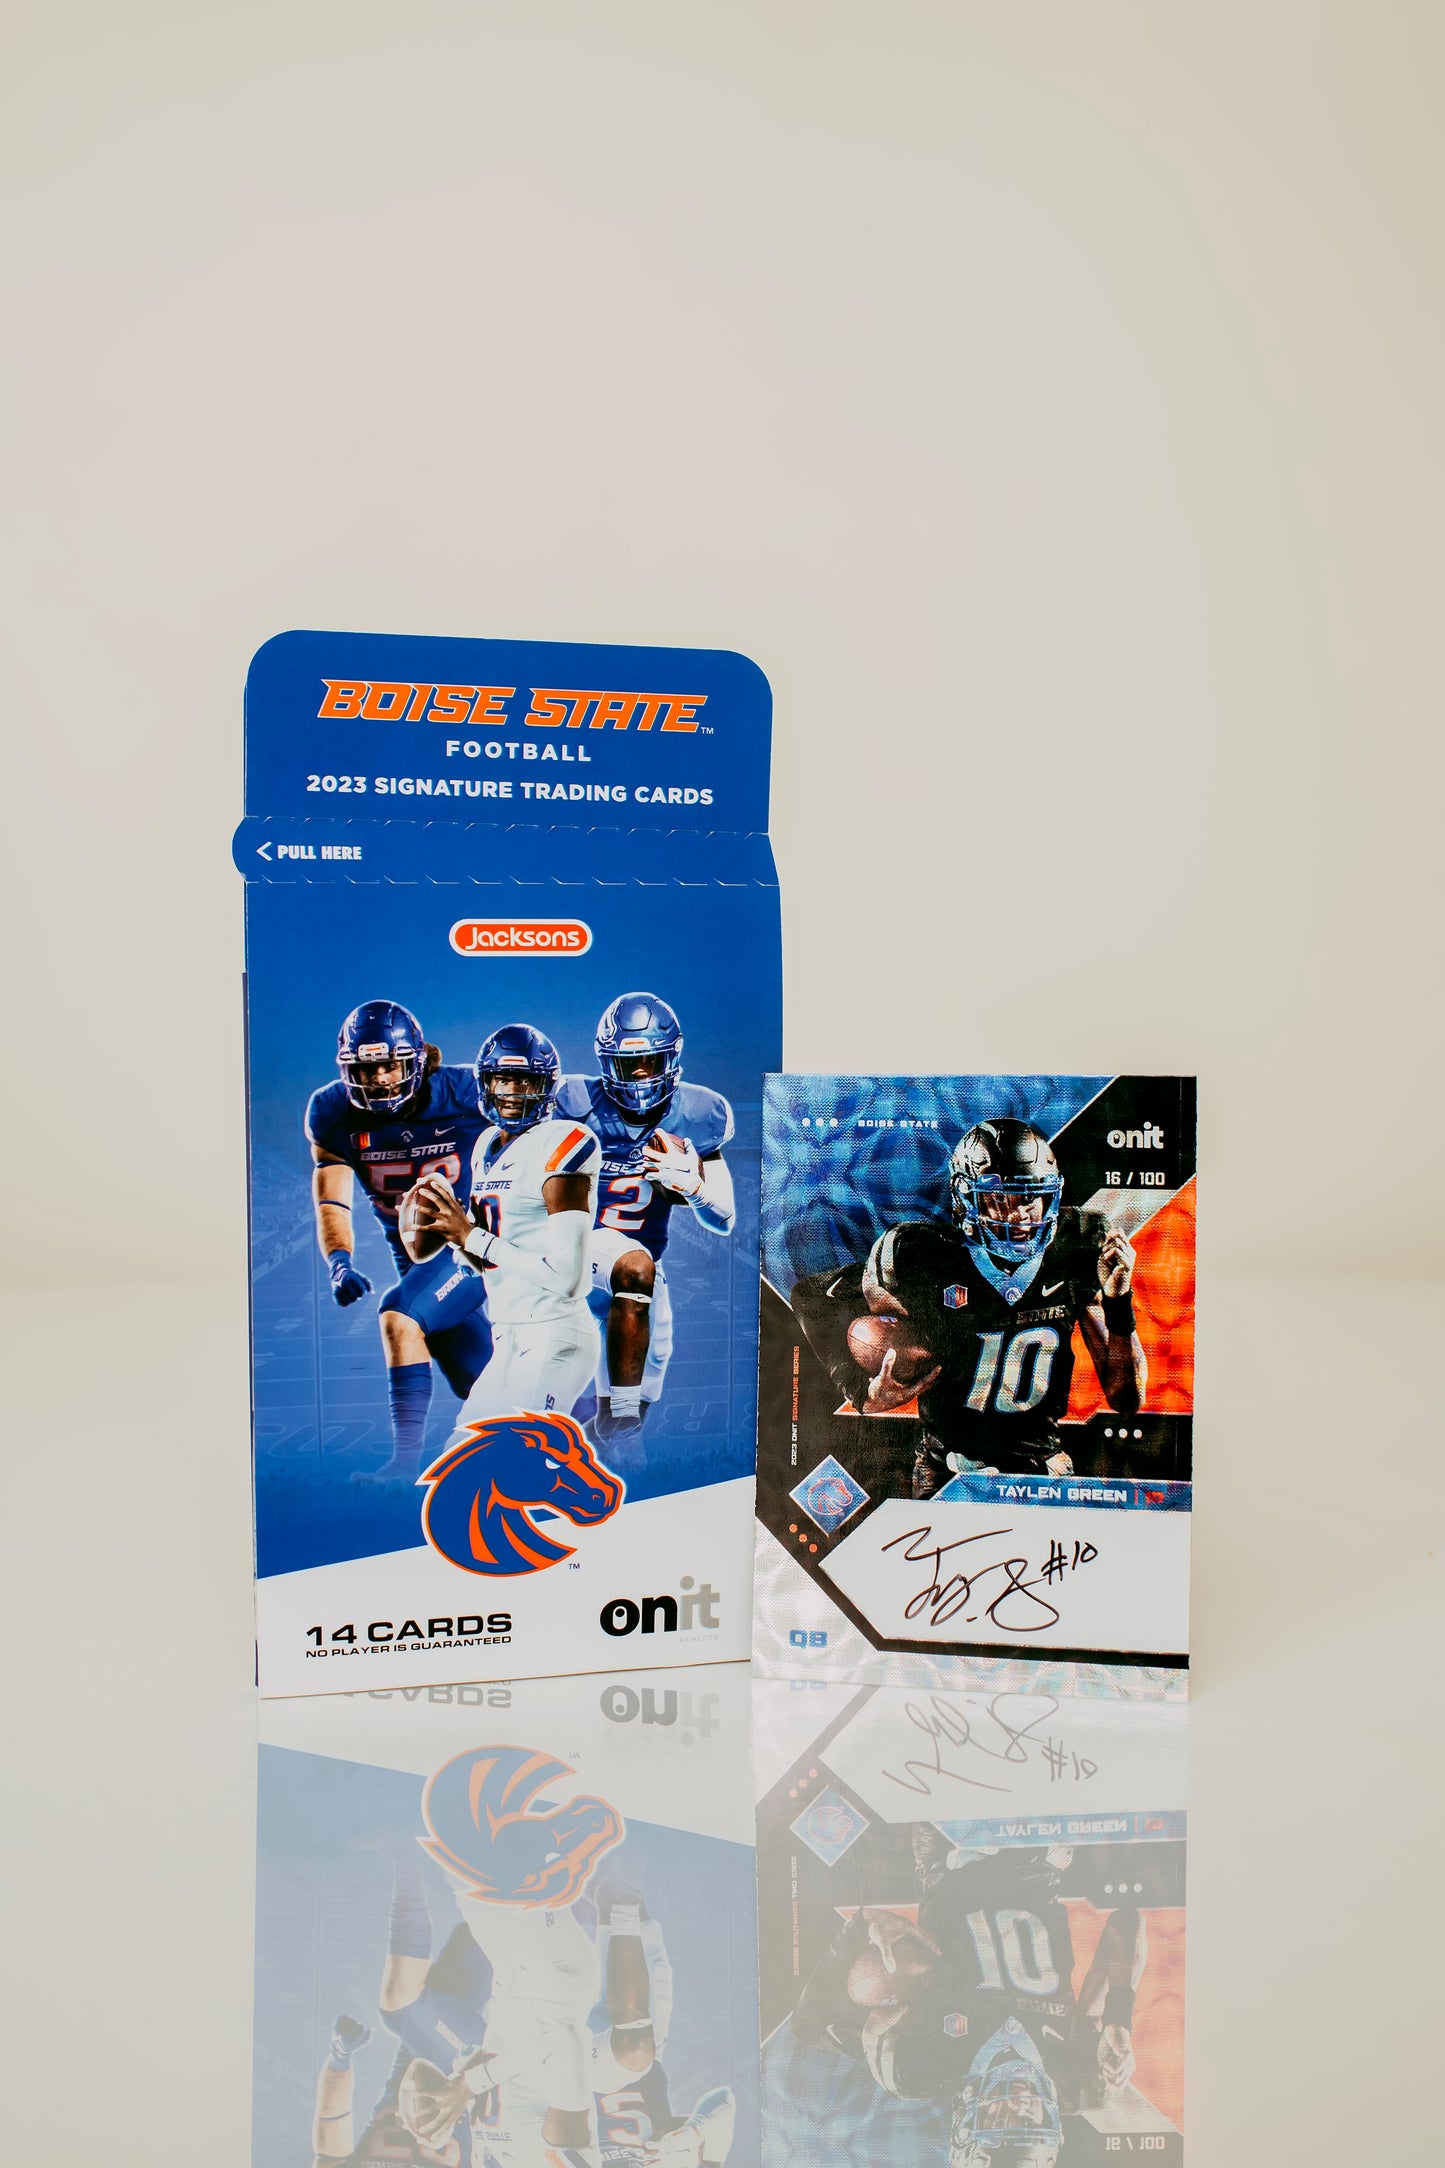 BOISE STATE FOOTBALL 2023 - SIGNATURE TRADING CARD PACK - Buy 1, Get 1 FREE